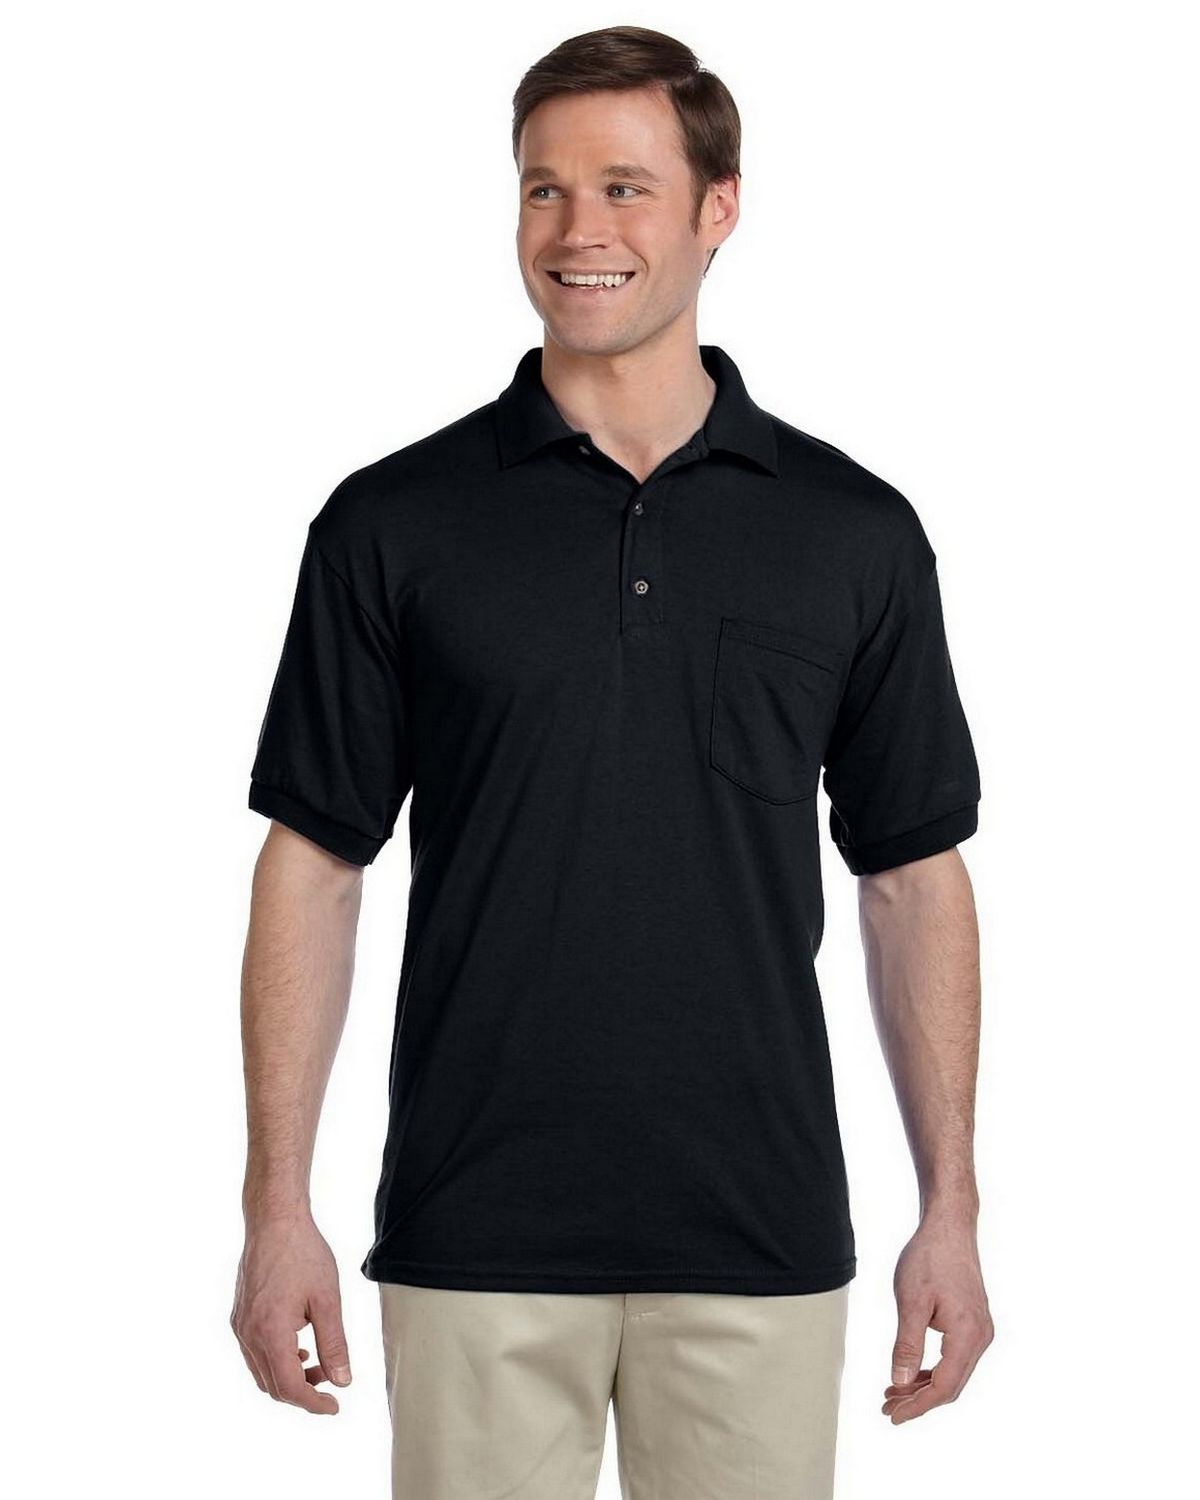 Reviews about Gildan G890 DryBlend 50/50 Jersey Polo with Pocket